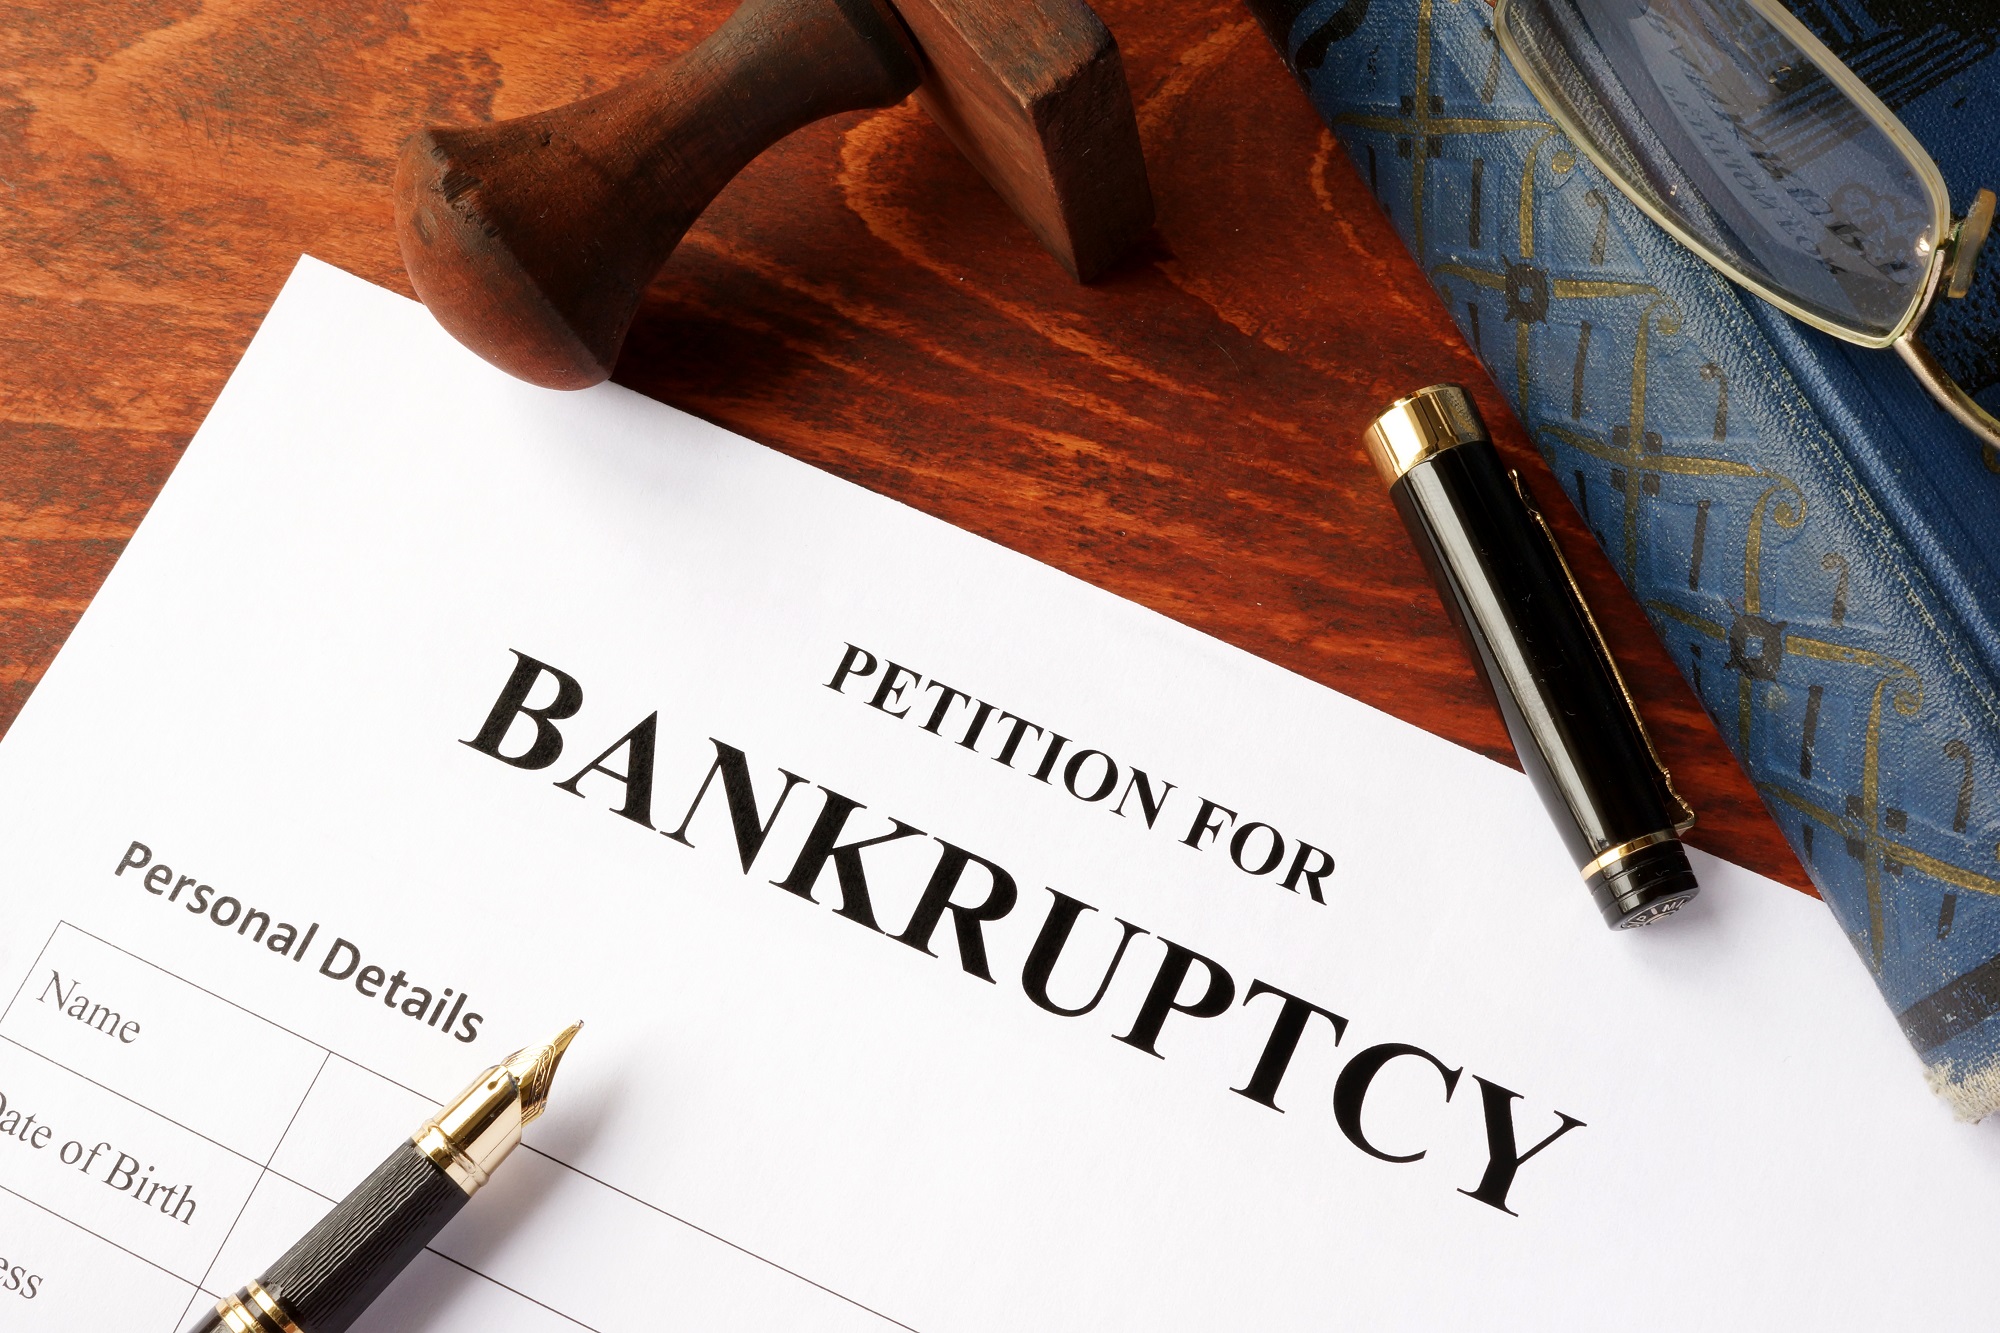 What is Bankruptcy?